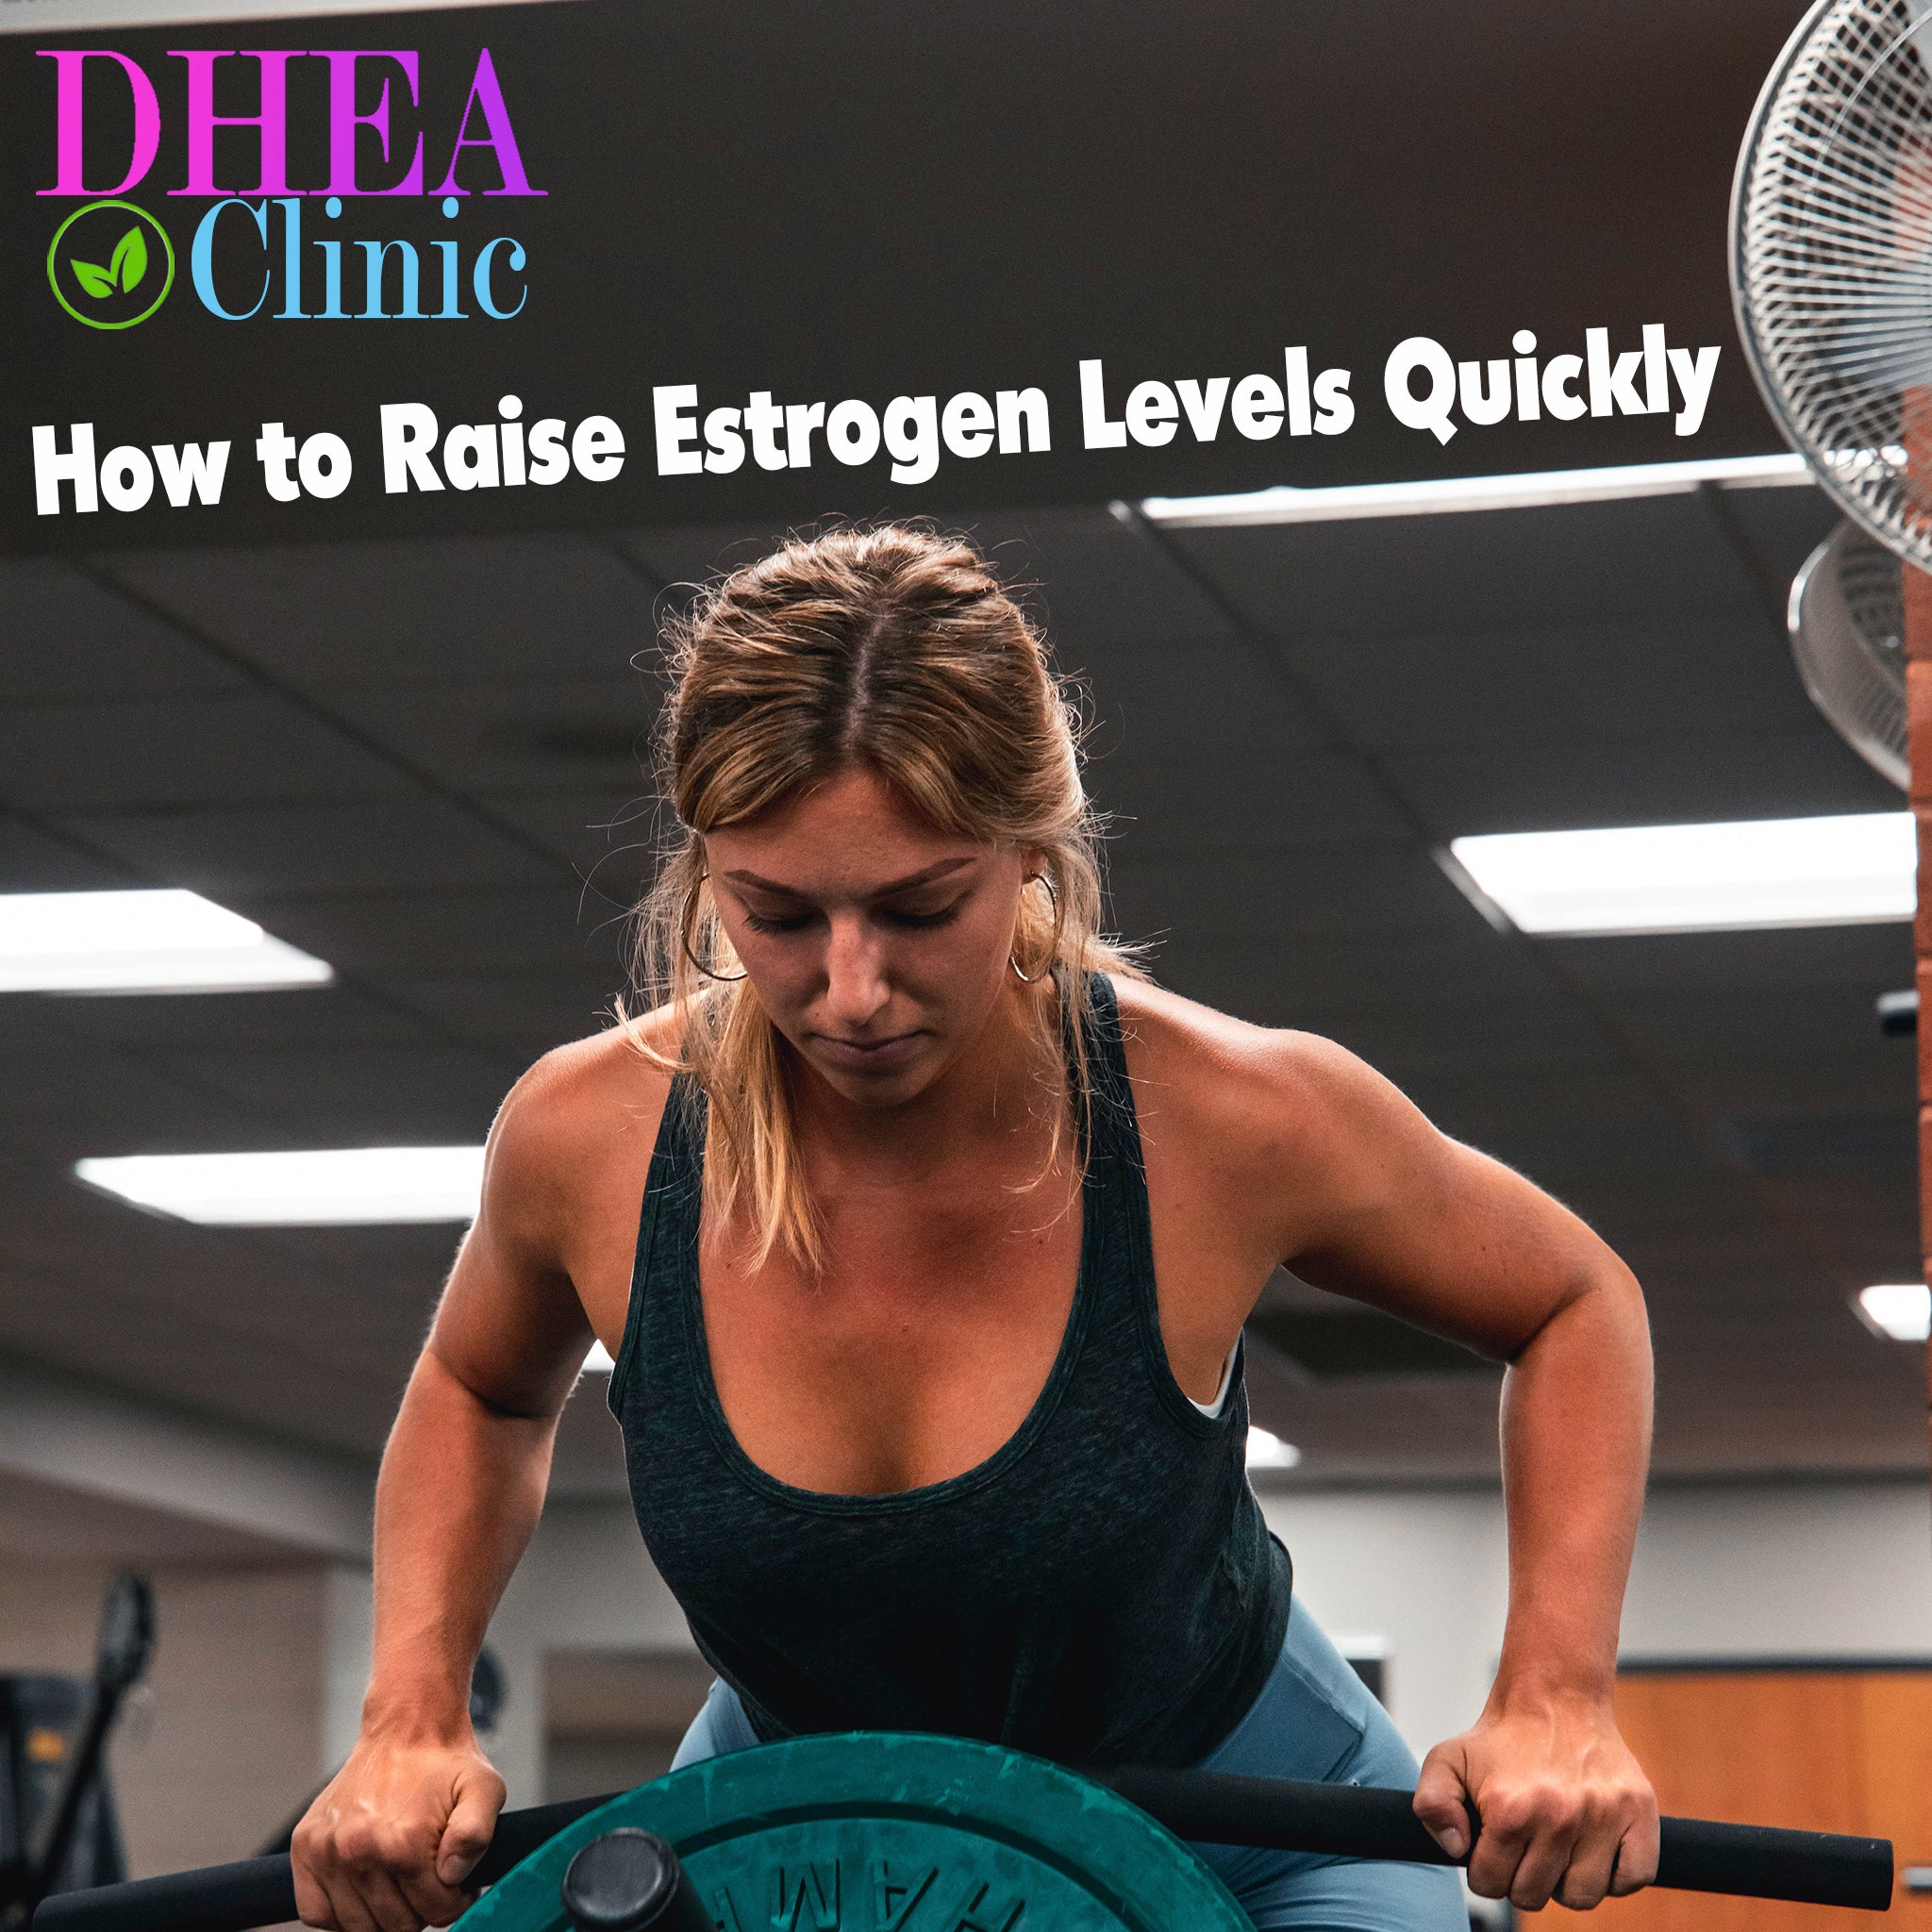 How Can I Raise My Estrogen Levels Quickly?